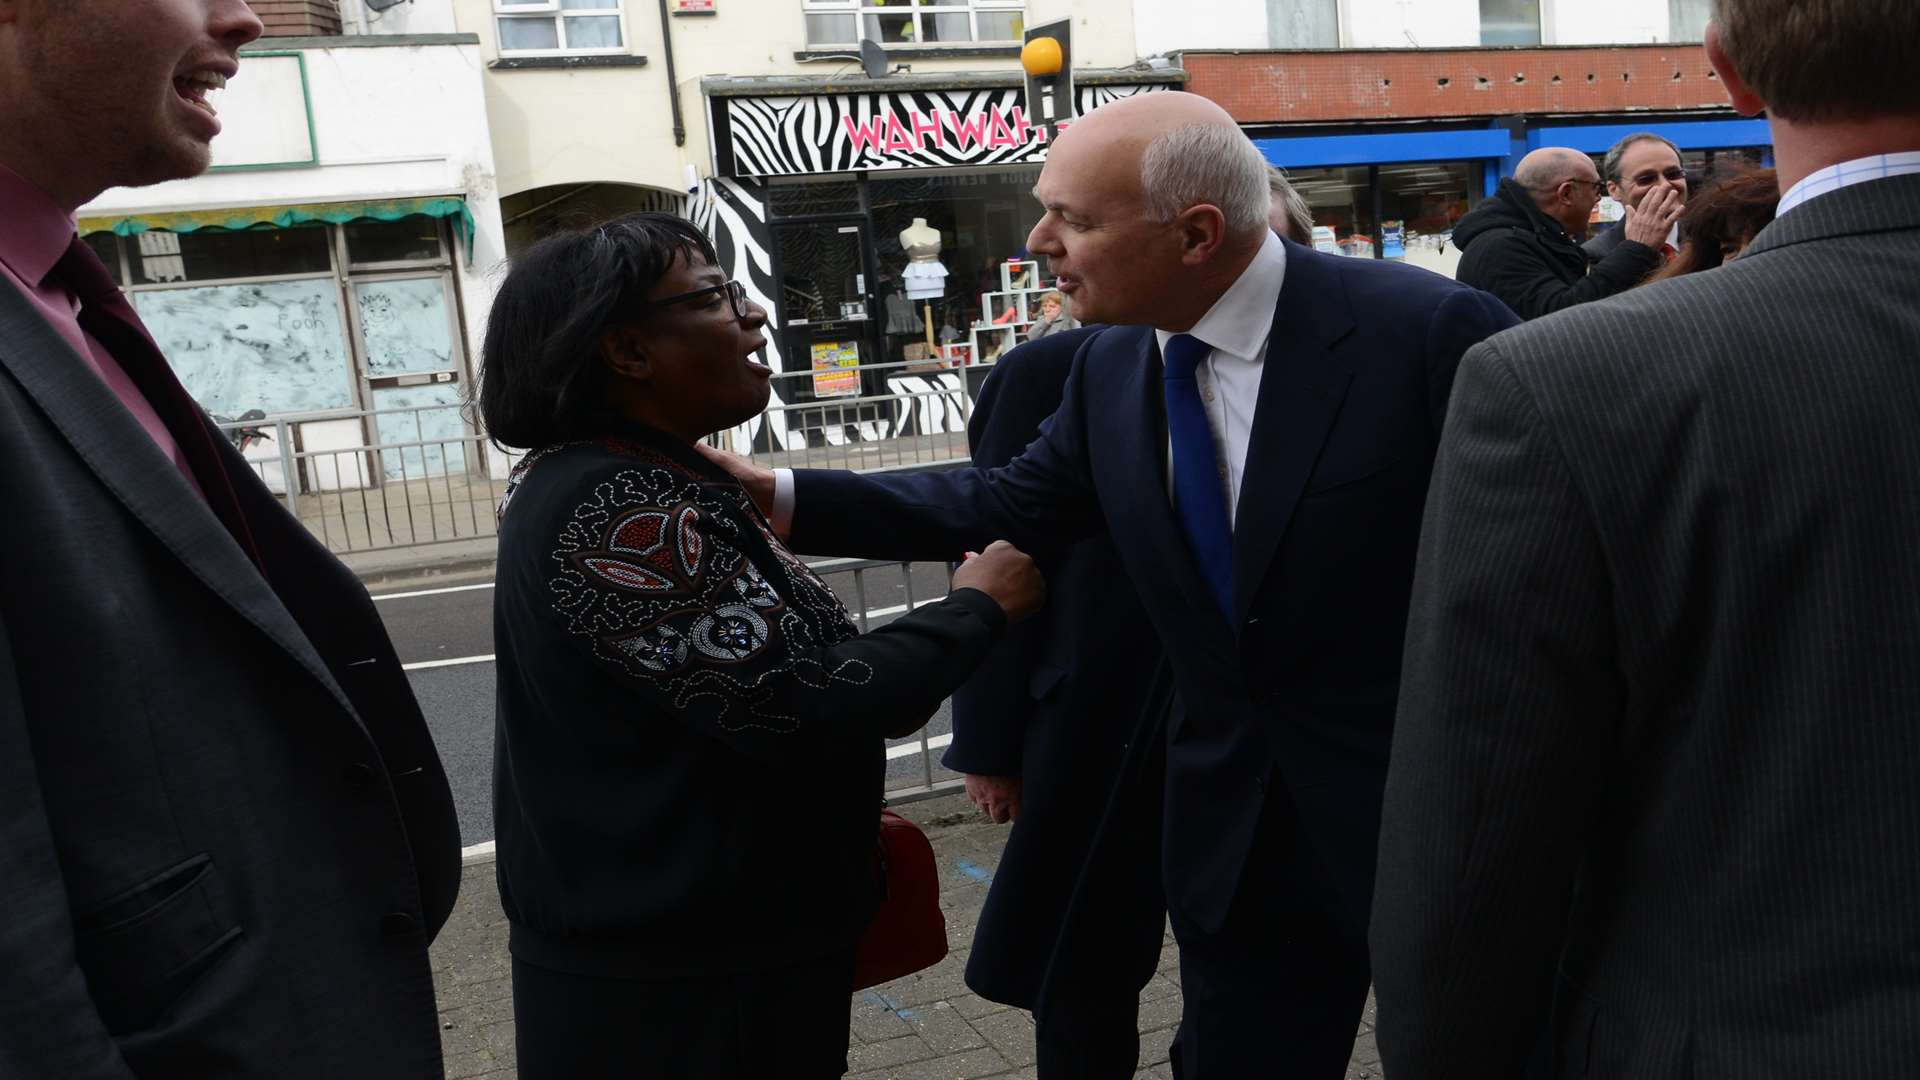 Iain Duncan Smith bumped into Diane Abbott on the campaign trail. Picture: Gary Browne.